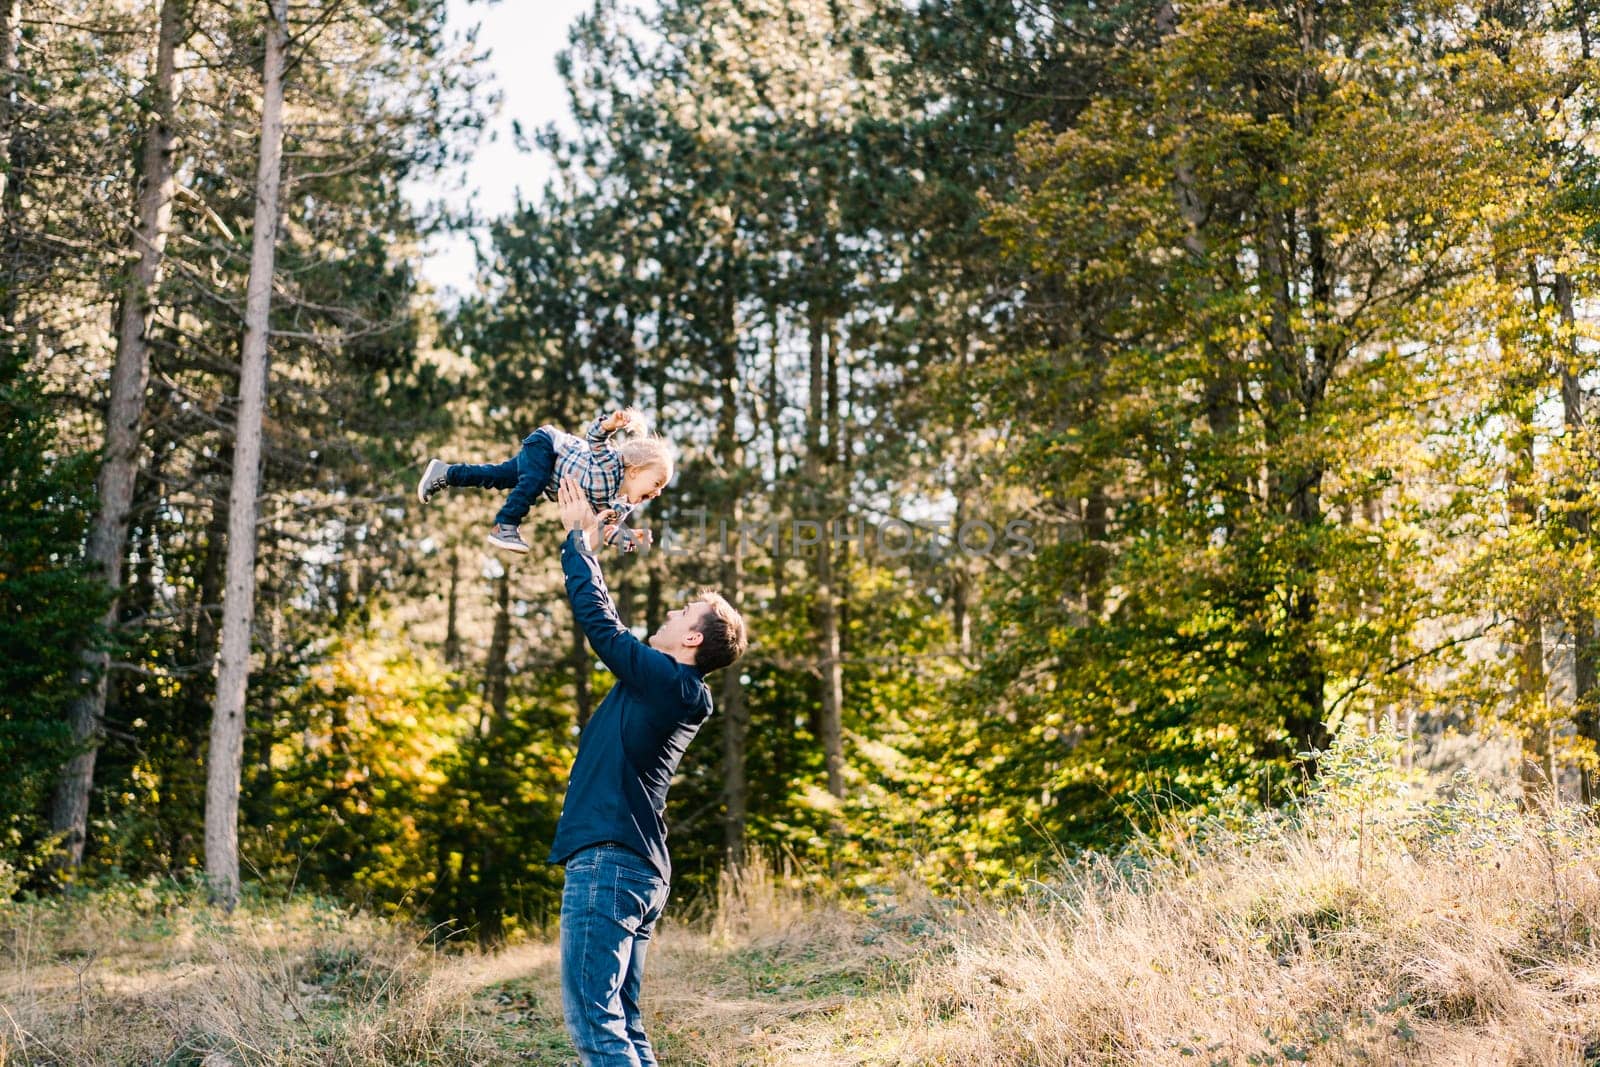 Dad throws up a laughing little girl on a sunny lawn in the forest. High quality photo